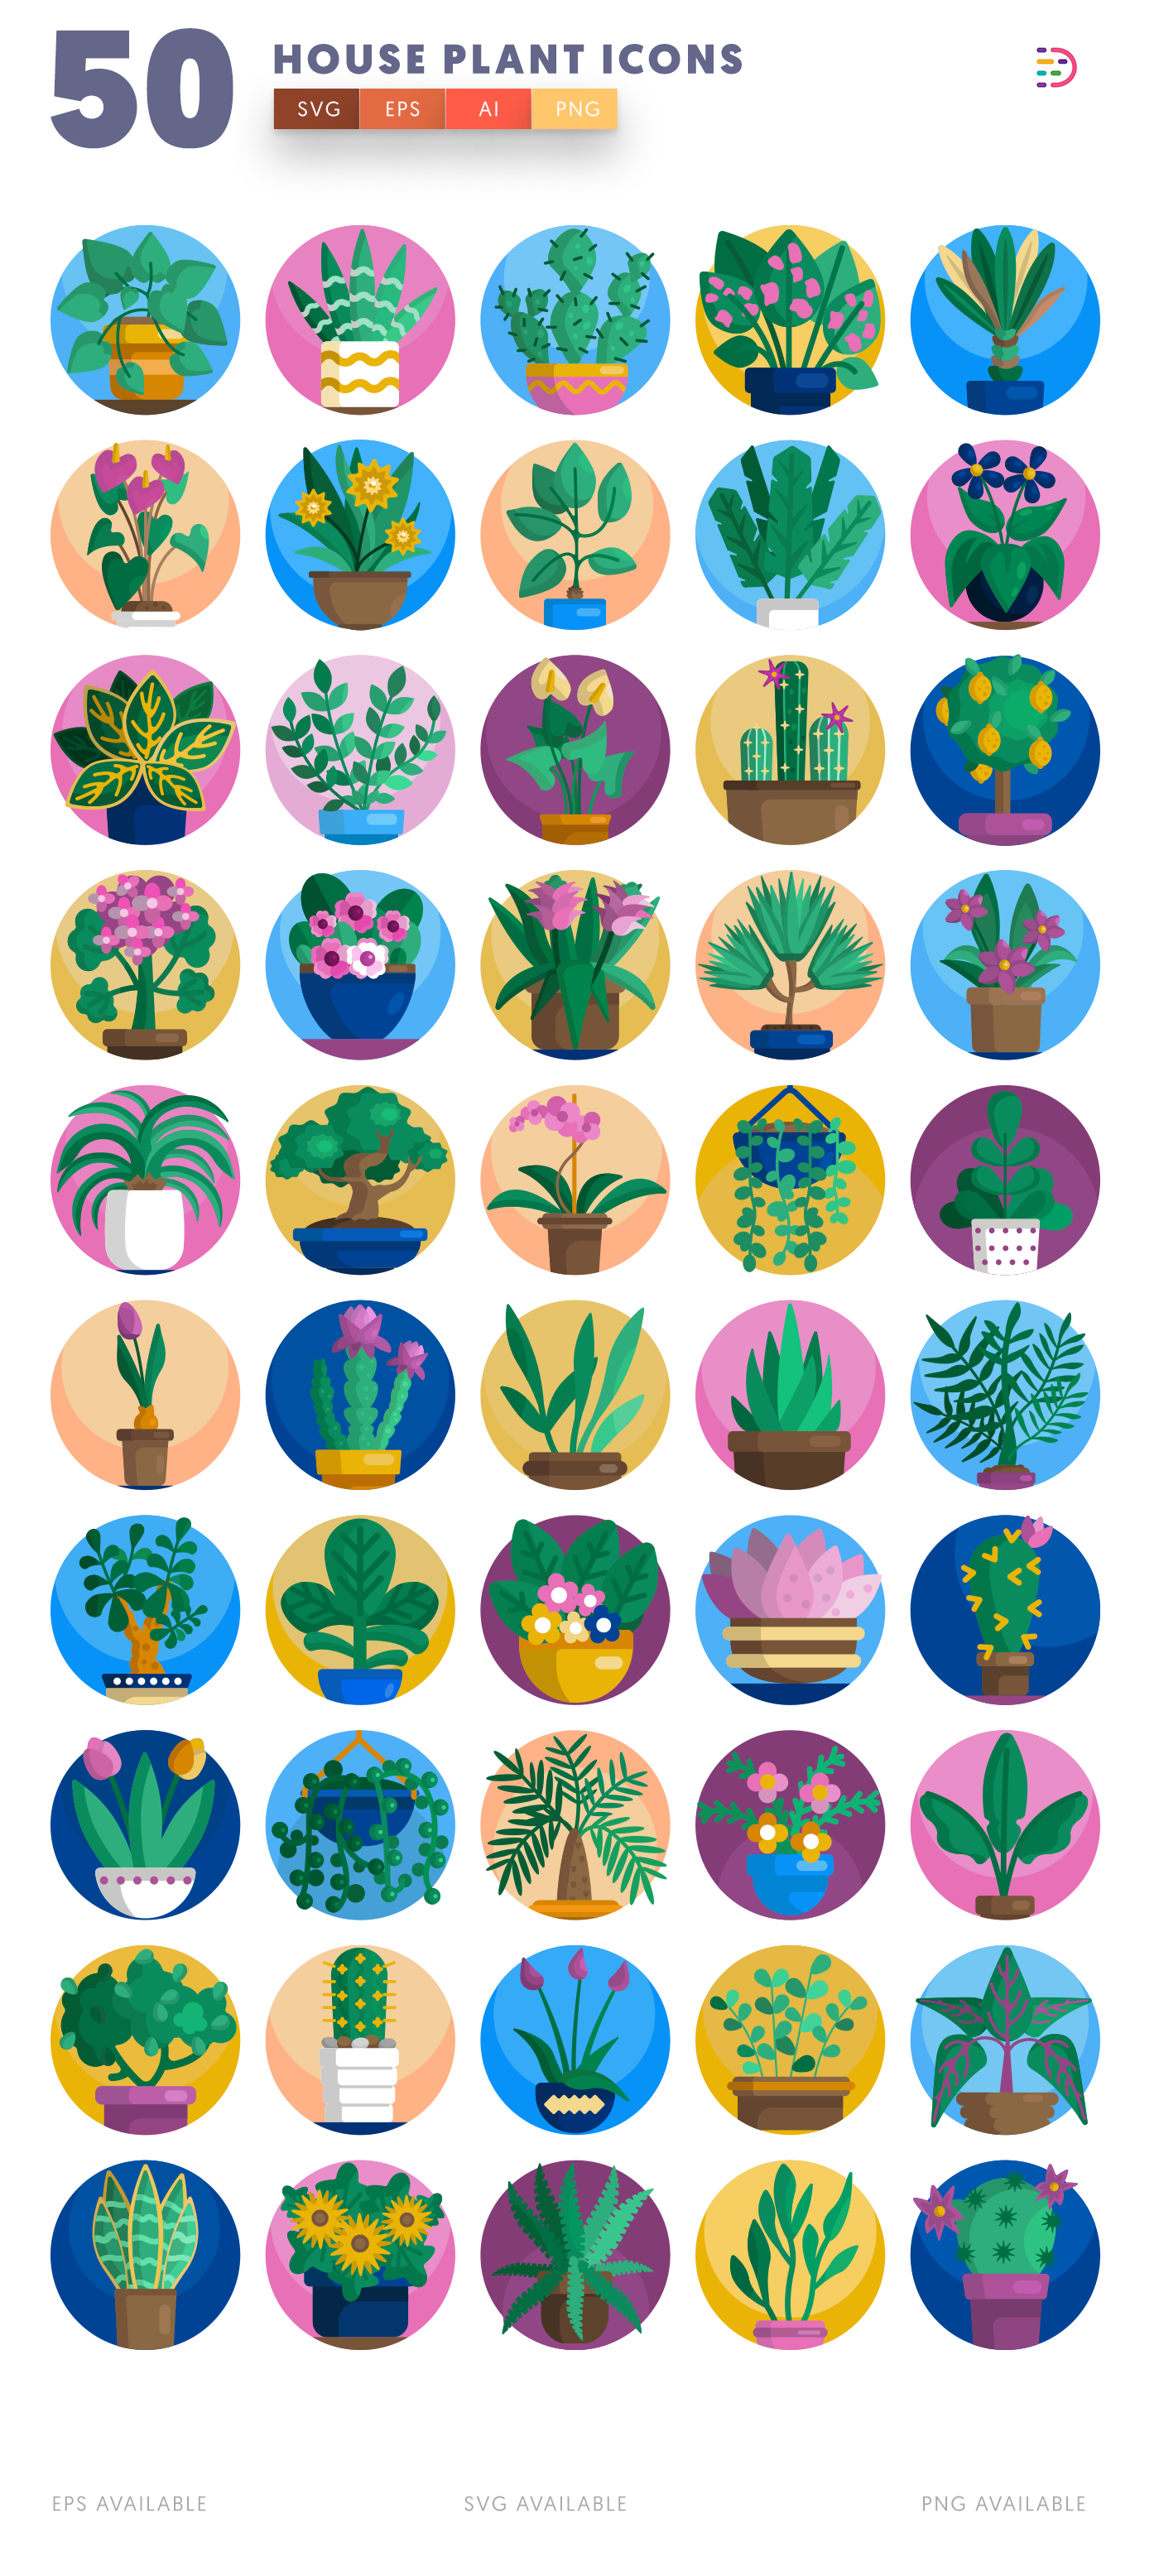 Design ready 50 House Plant Icons